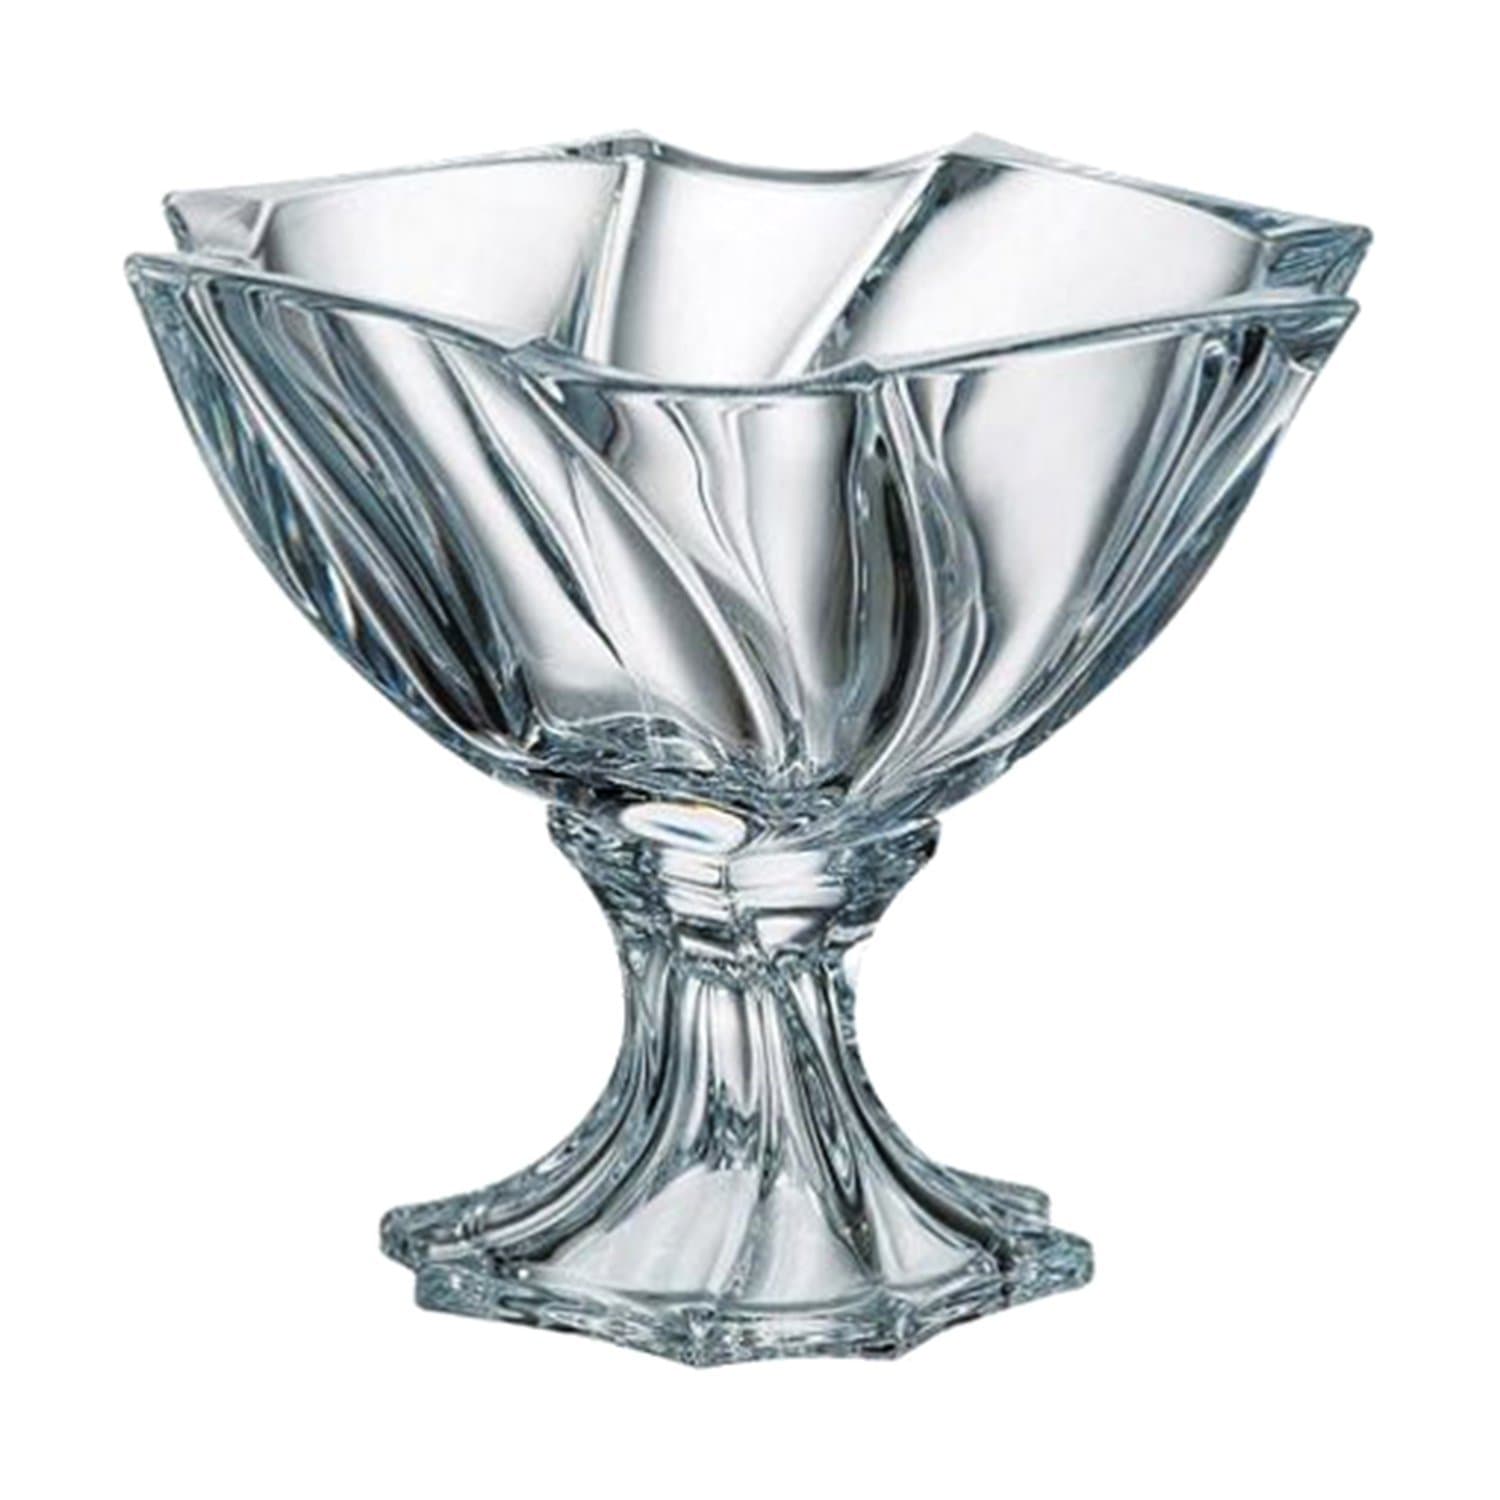 Bohemia Crystal Glass Neptune Footed Bowl - 25.5 cm - 5392044 - Jashanmal Home